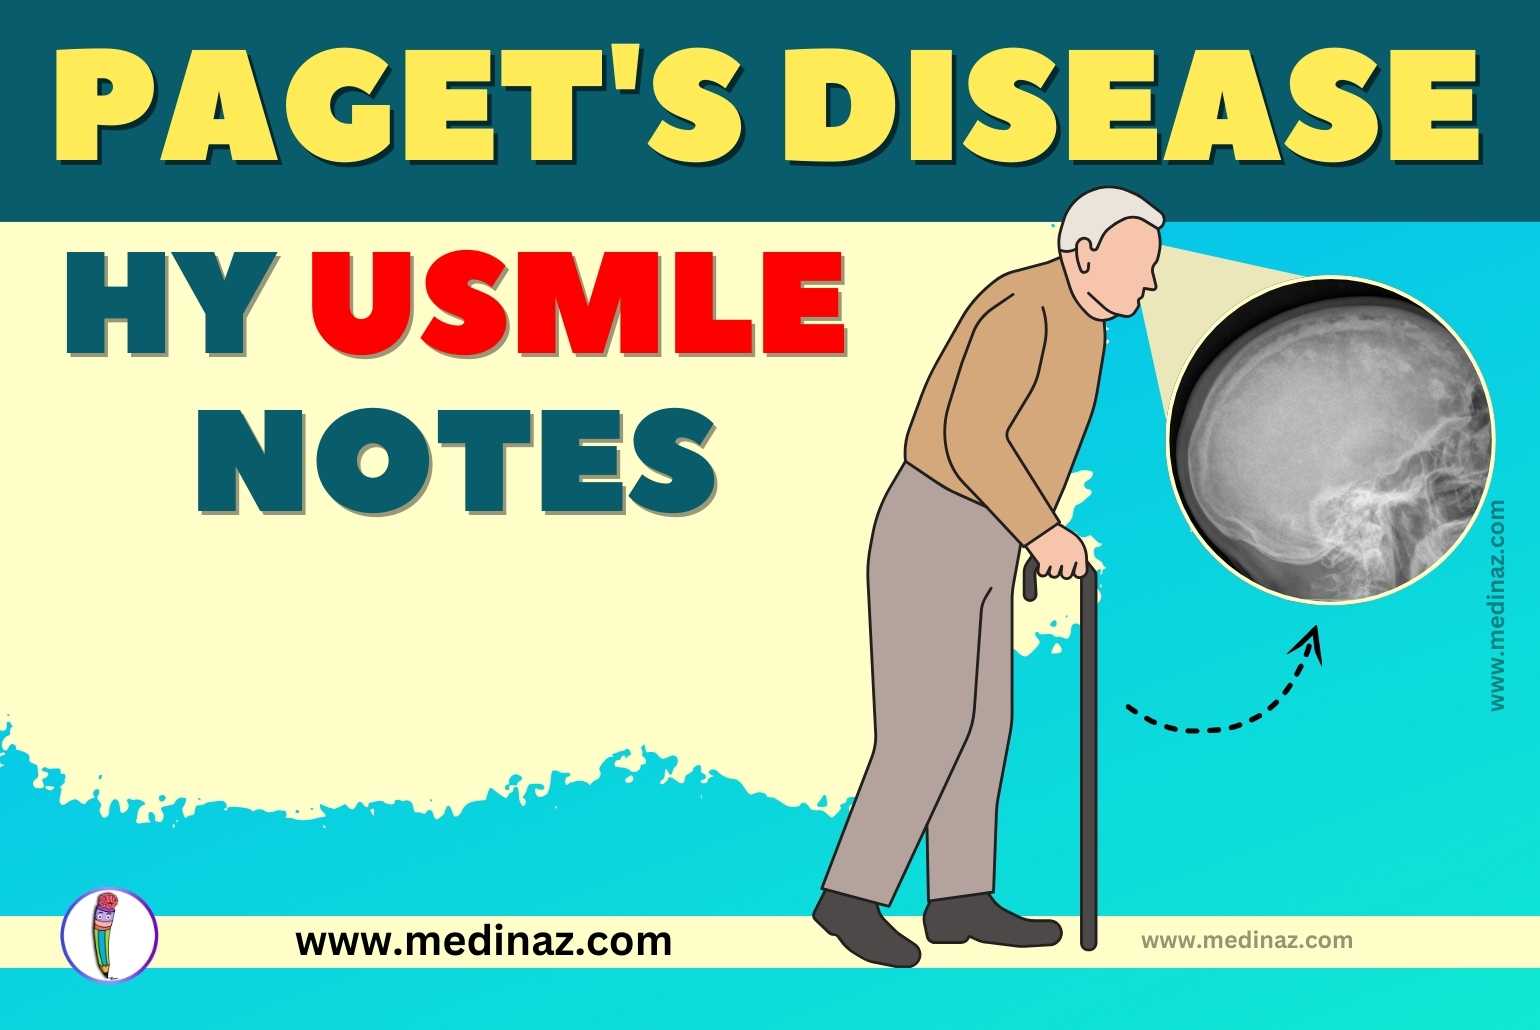 Paget's Disease USMLE Notes